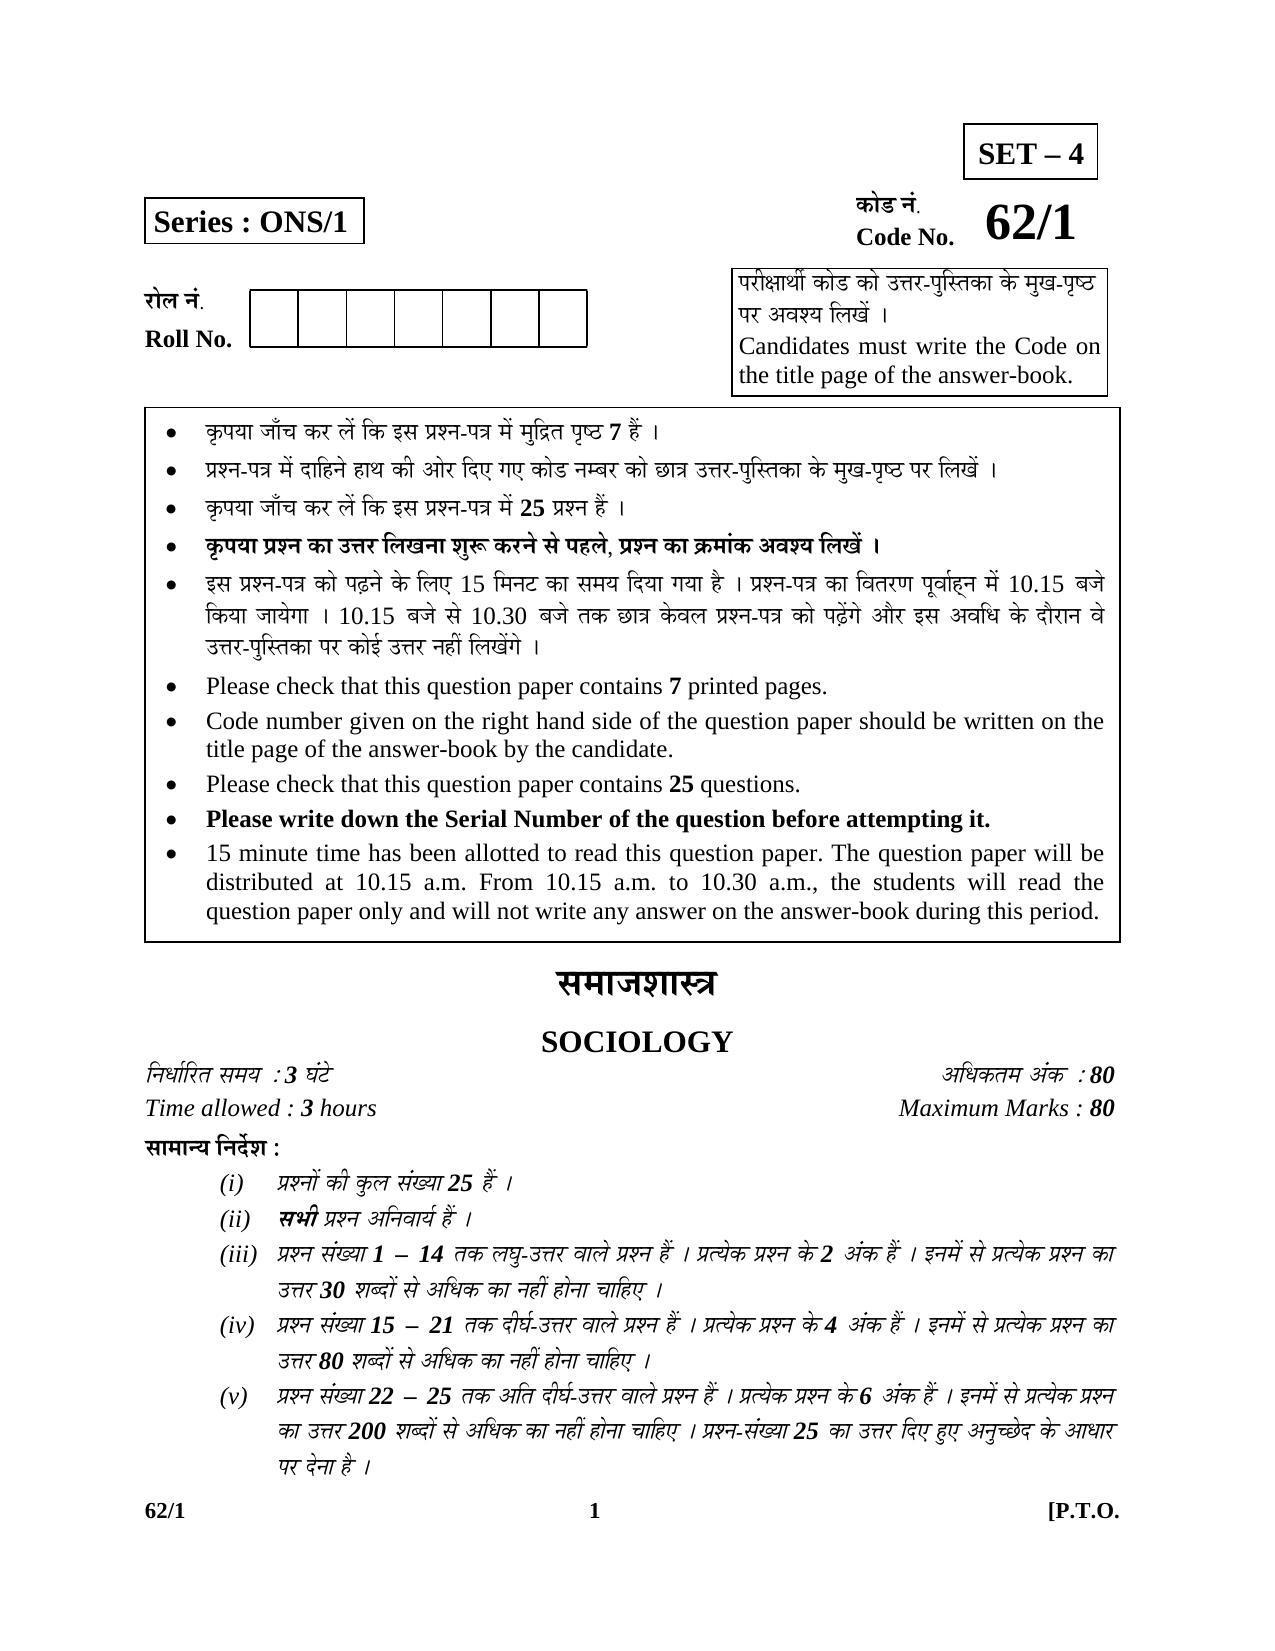 CBSE Class 12 62-1 SOCIOLOGY 2016 Question Paper - Page 1